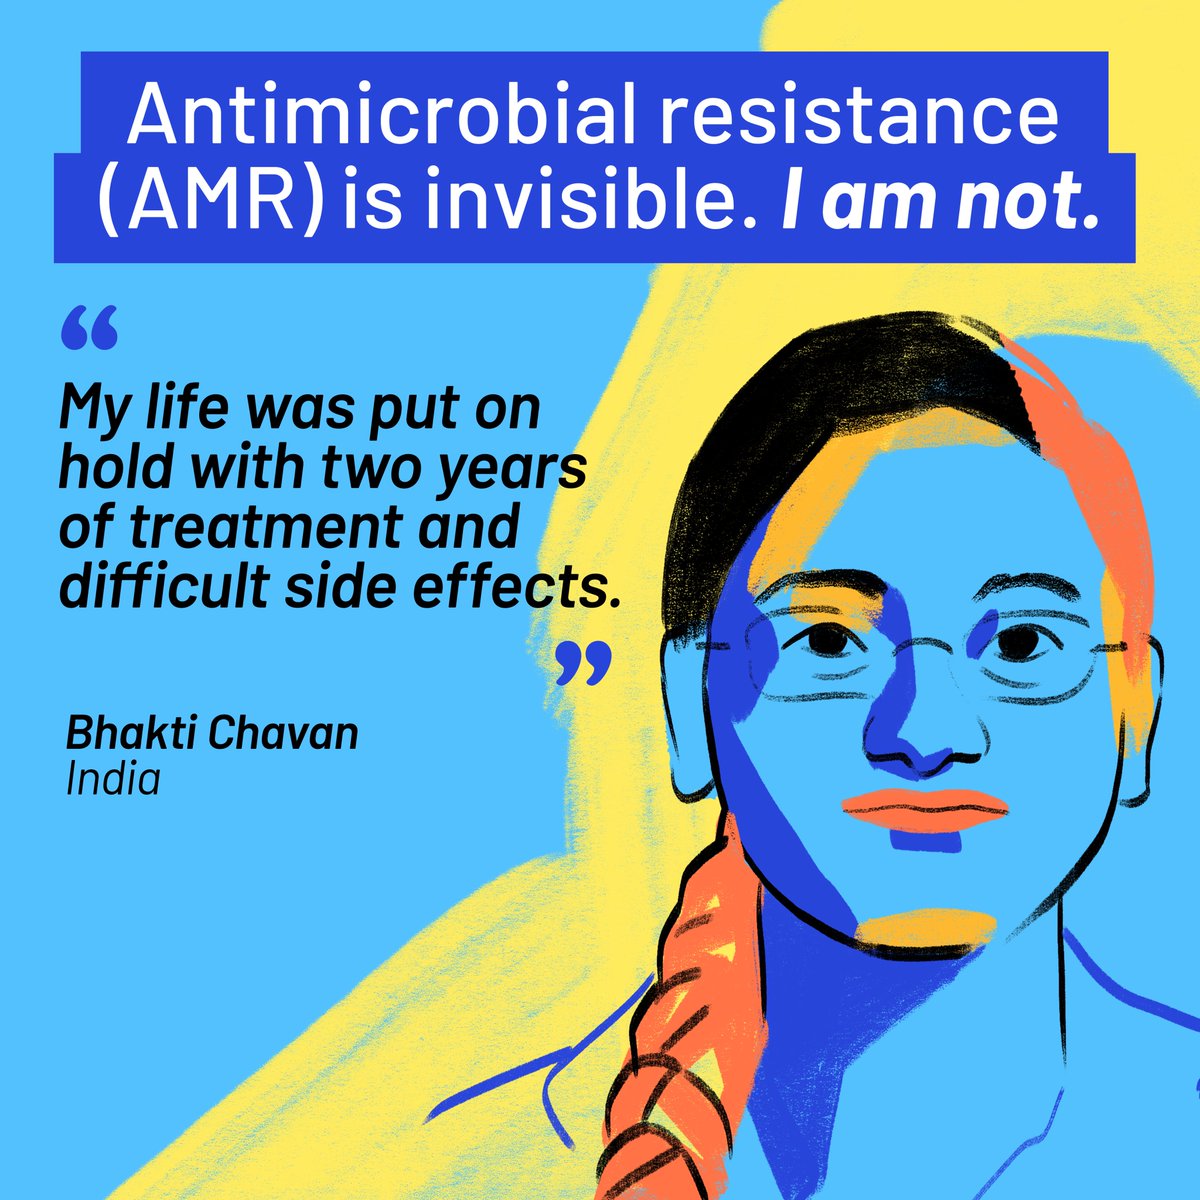 Bhakti's battle with drug-resistant #tuberculosis in 2017 was grueling, she had to endure daily painful injections & harsh side effects. Despite setbacks, she emerged as a champion for TB patients. Learn more about #AMRsurvivors & #AntimicrobialResistance ➡️…